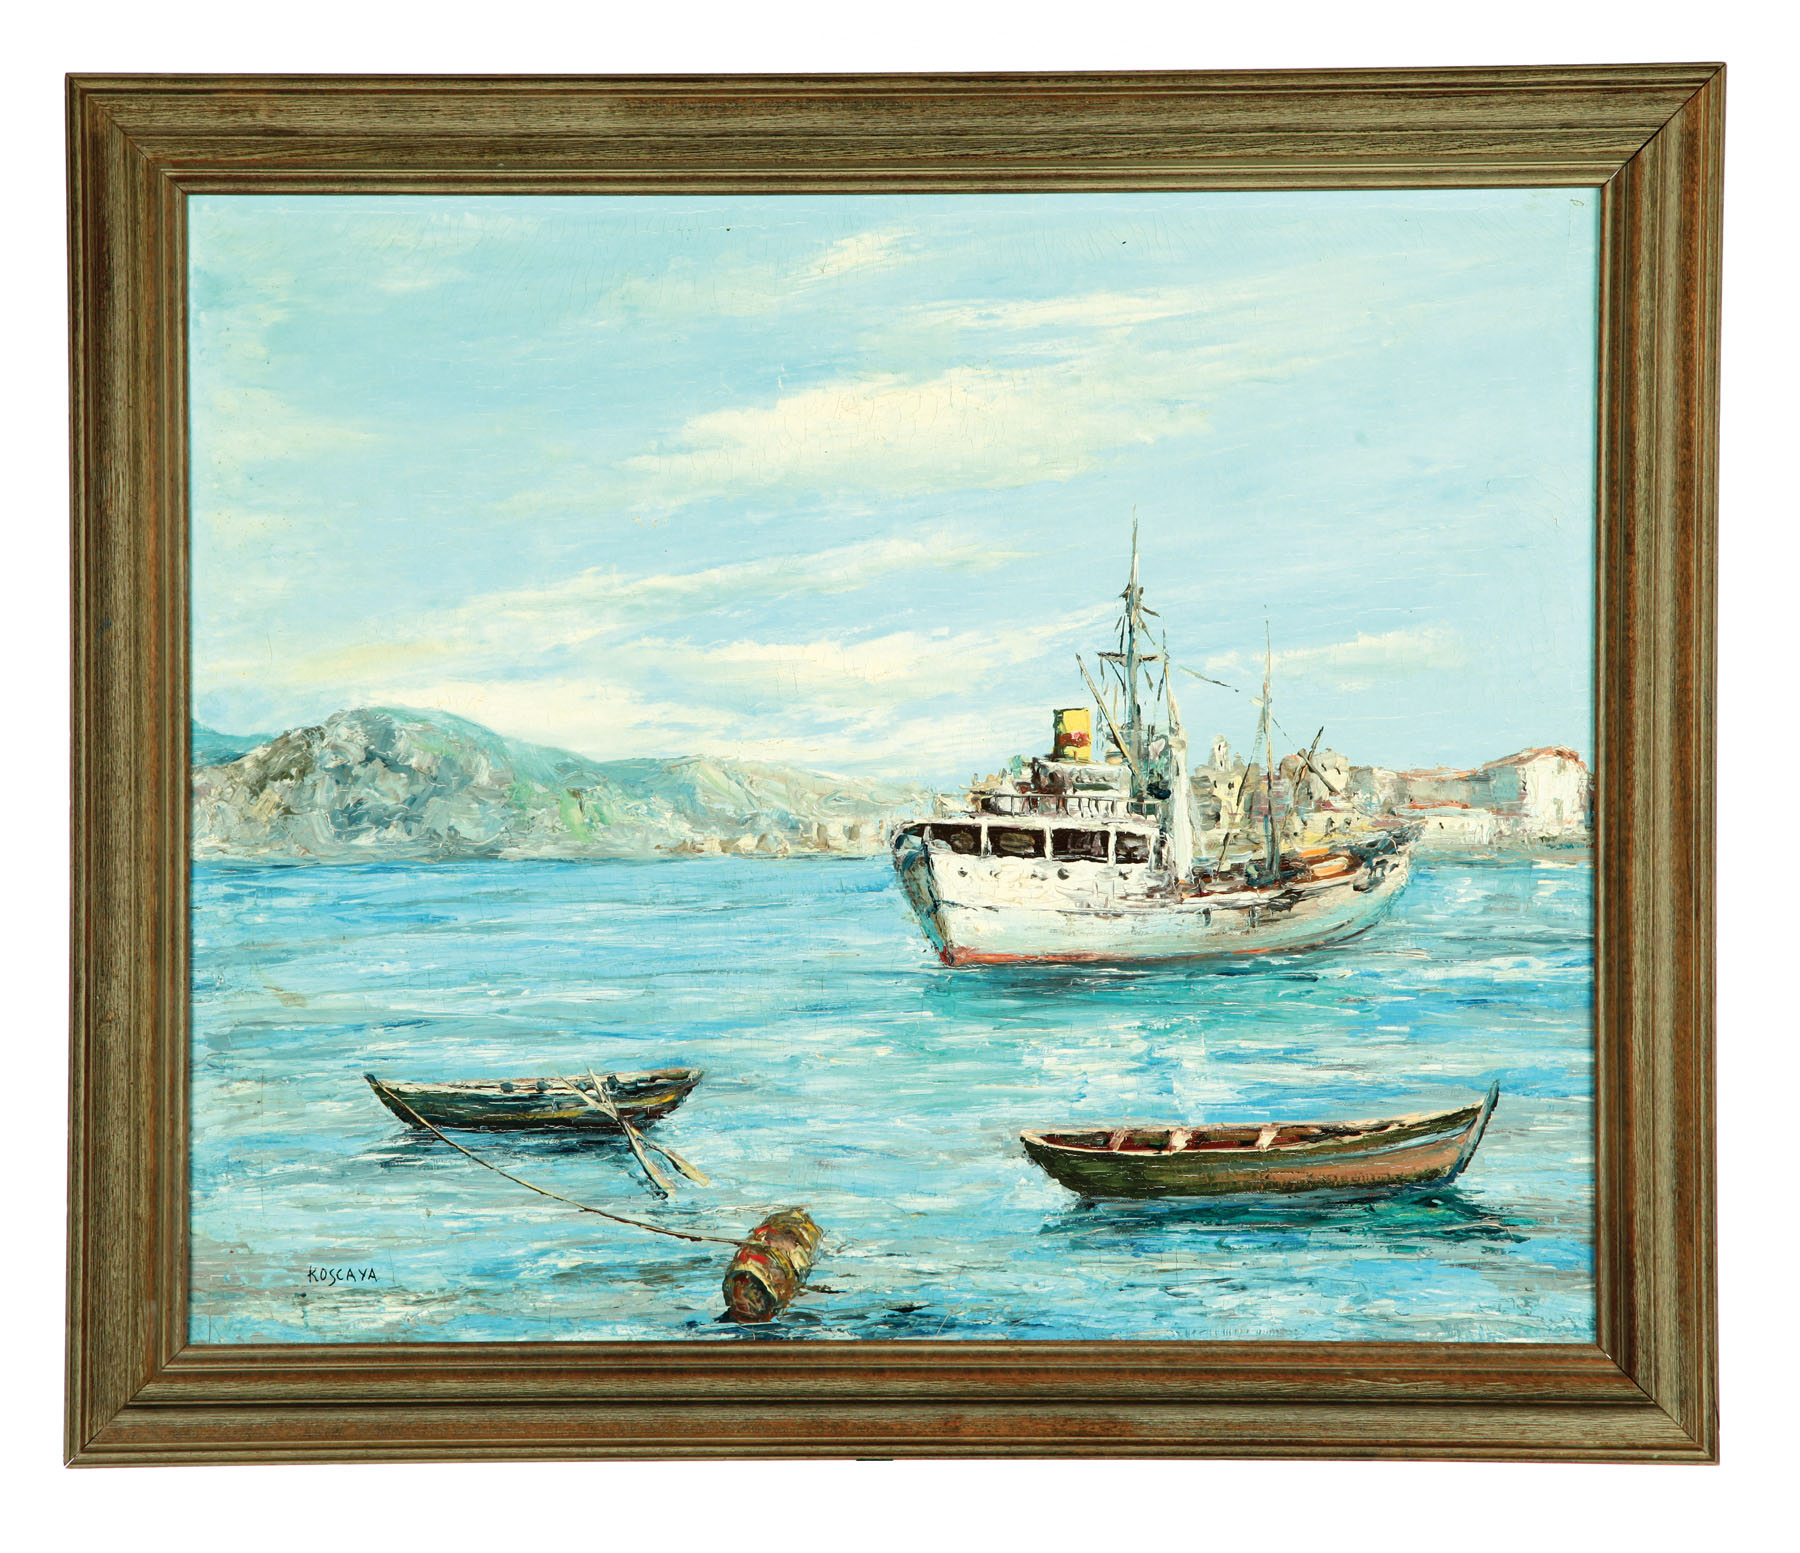 SEASCAPE WITH BOATS (RUSSIAN  20TH CENTURY).